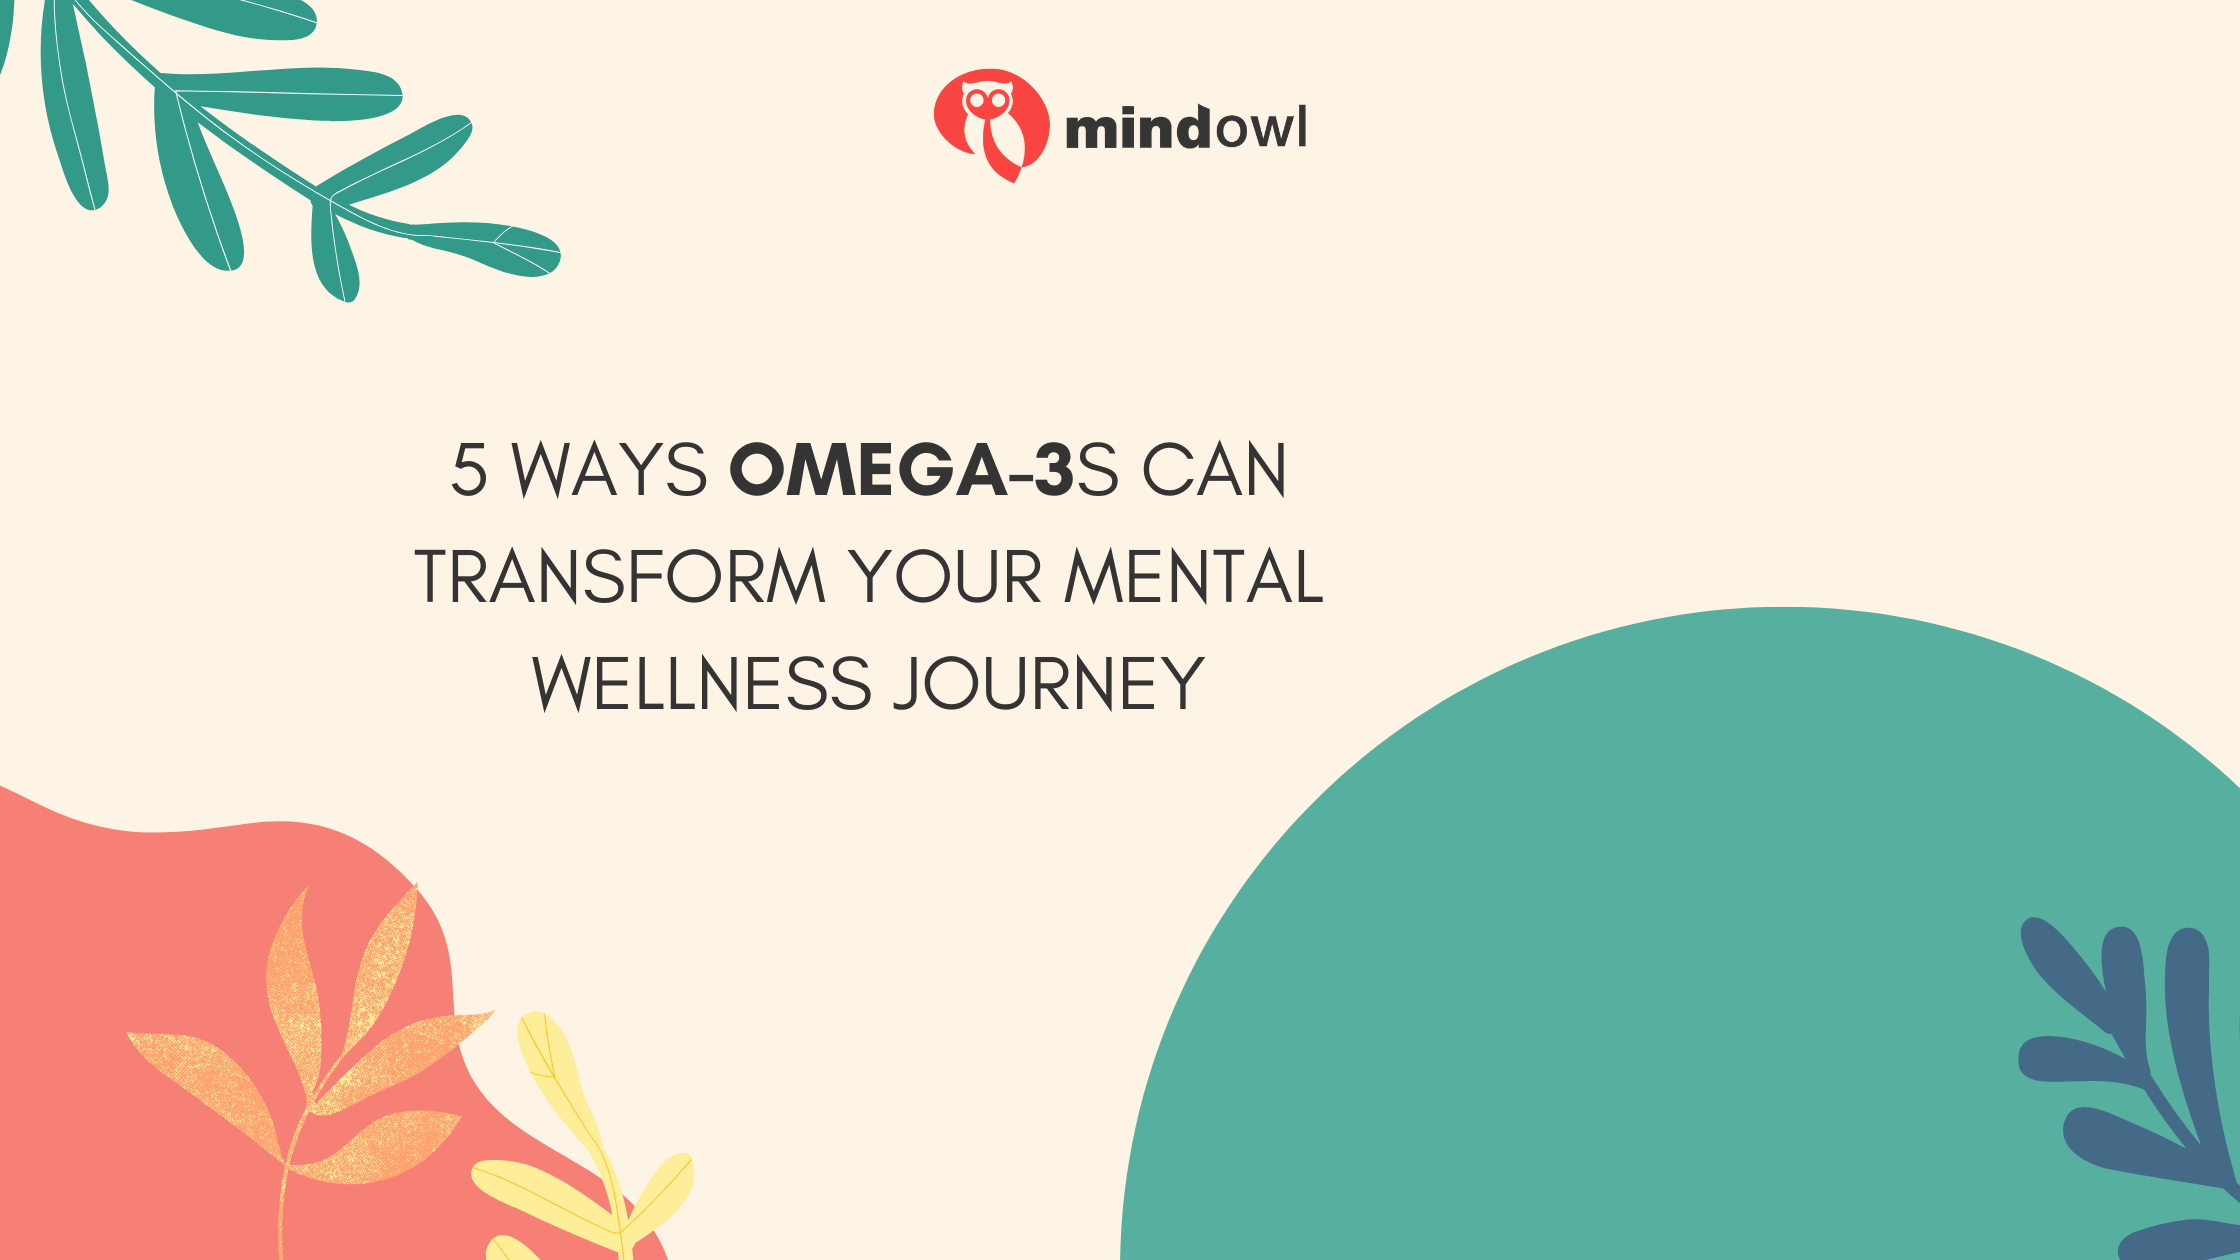 5 Ways Omega-3s Can Transform Your Mental Wellness Journey